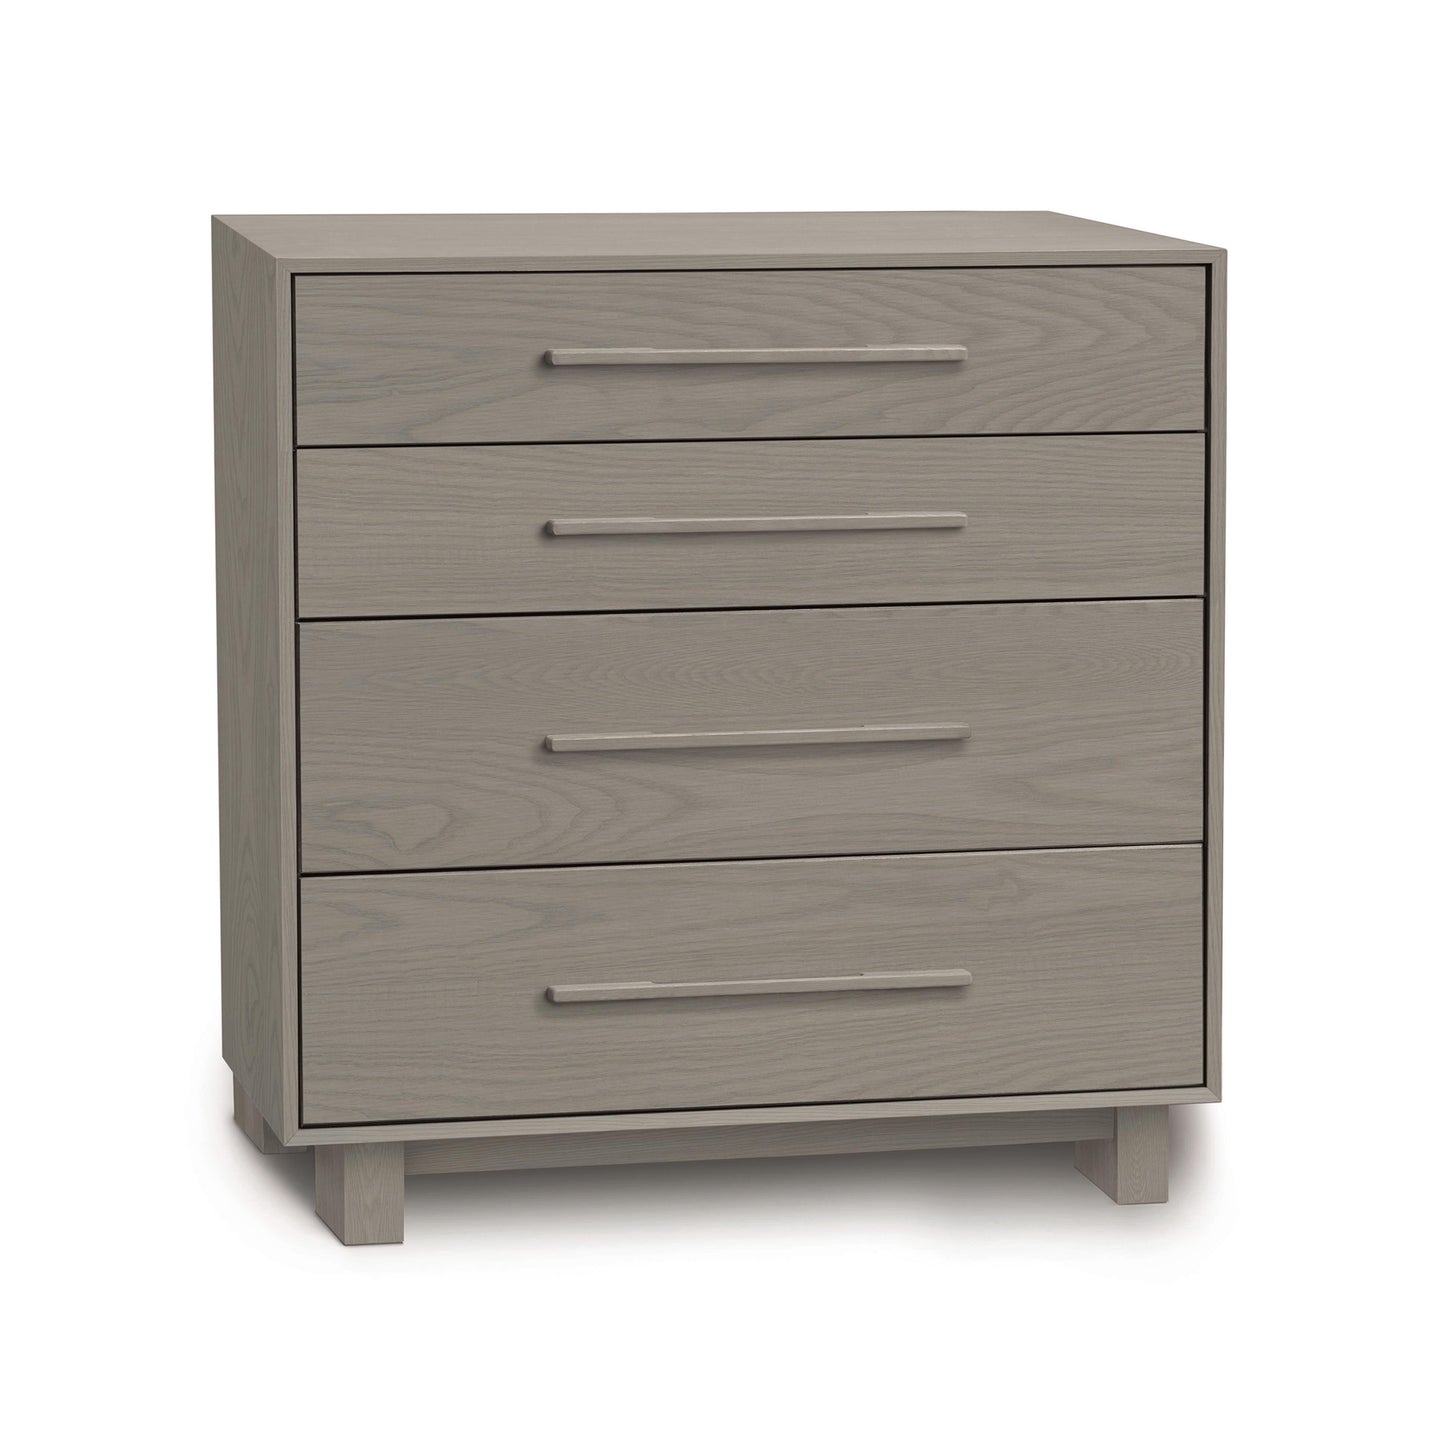 A contemporary Copeland Furniture Sloane 4-Drawer Chest against a white background.